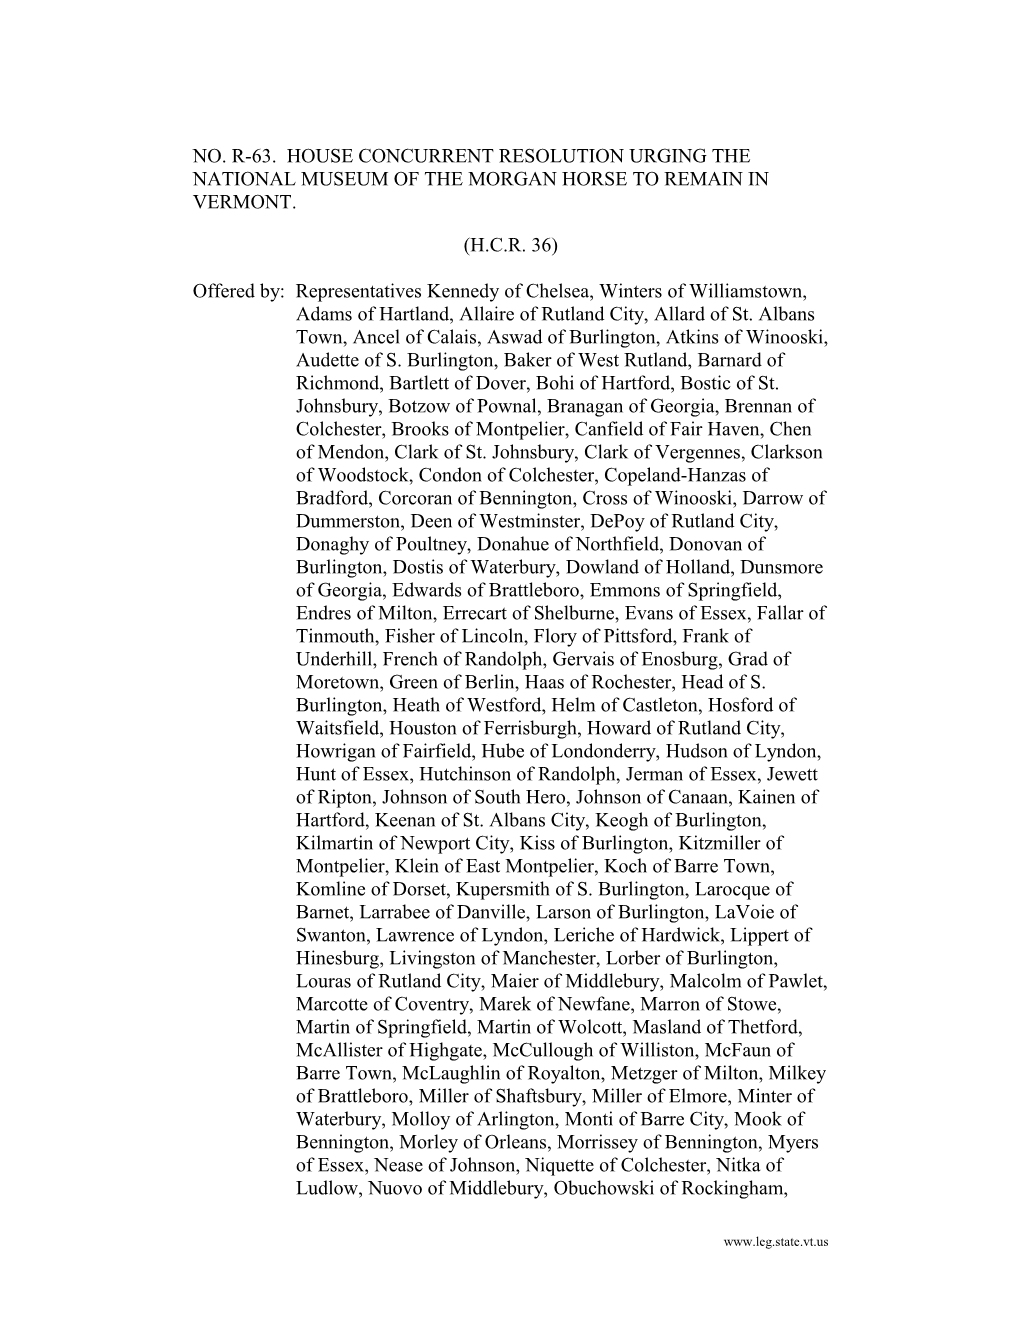 NO. R-63. House Concurrent Resolution Urging the National Museum of the Morgan Horse To